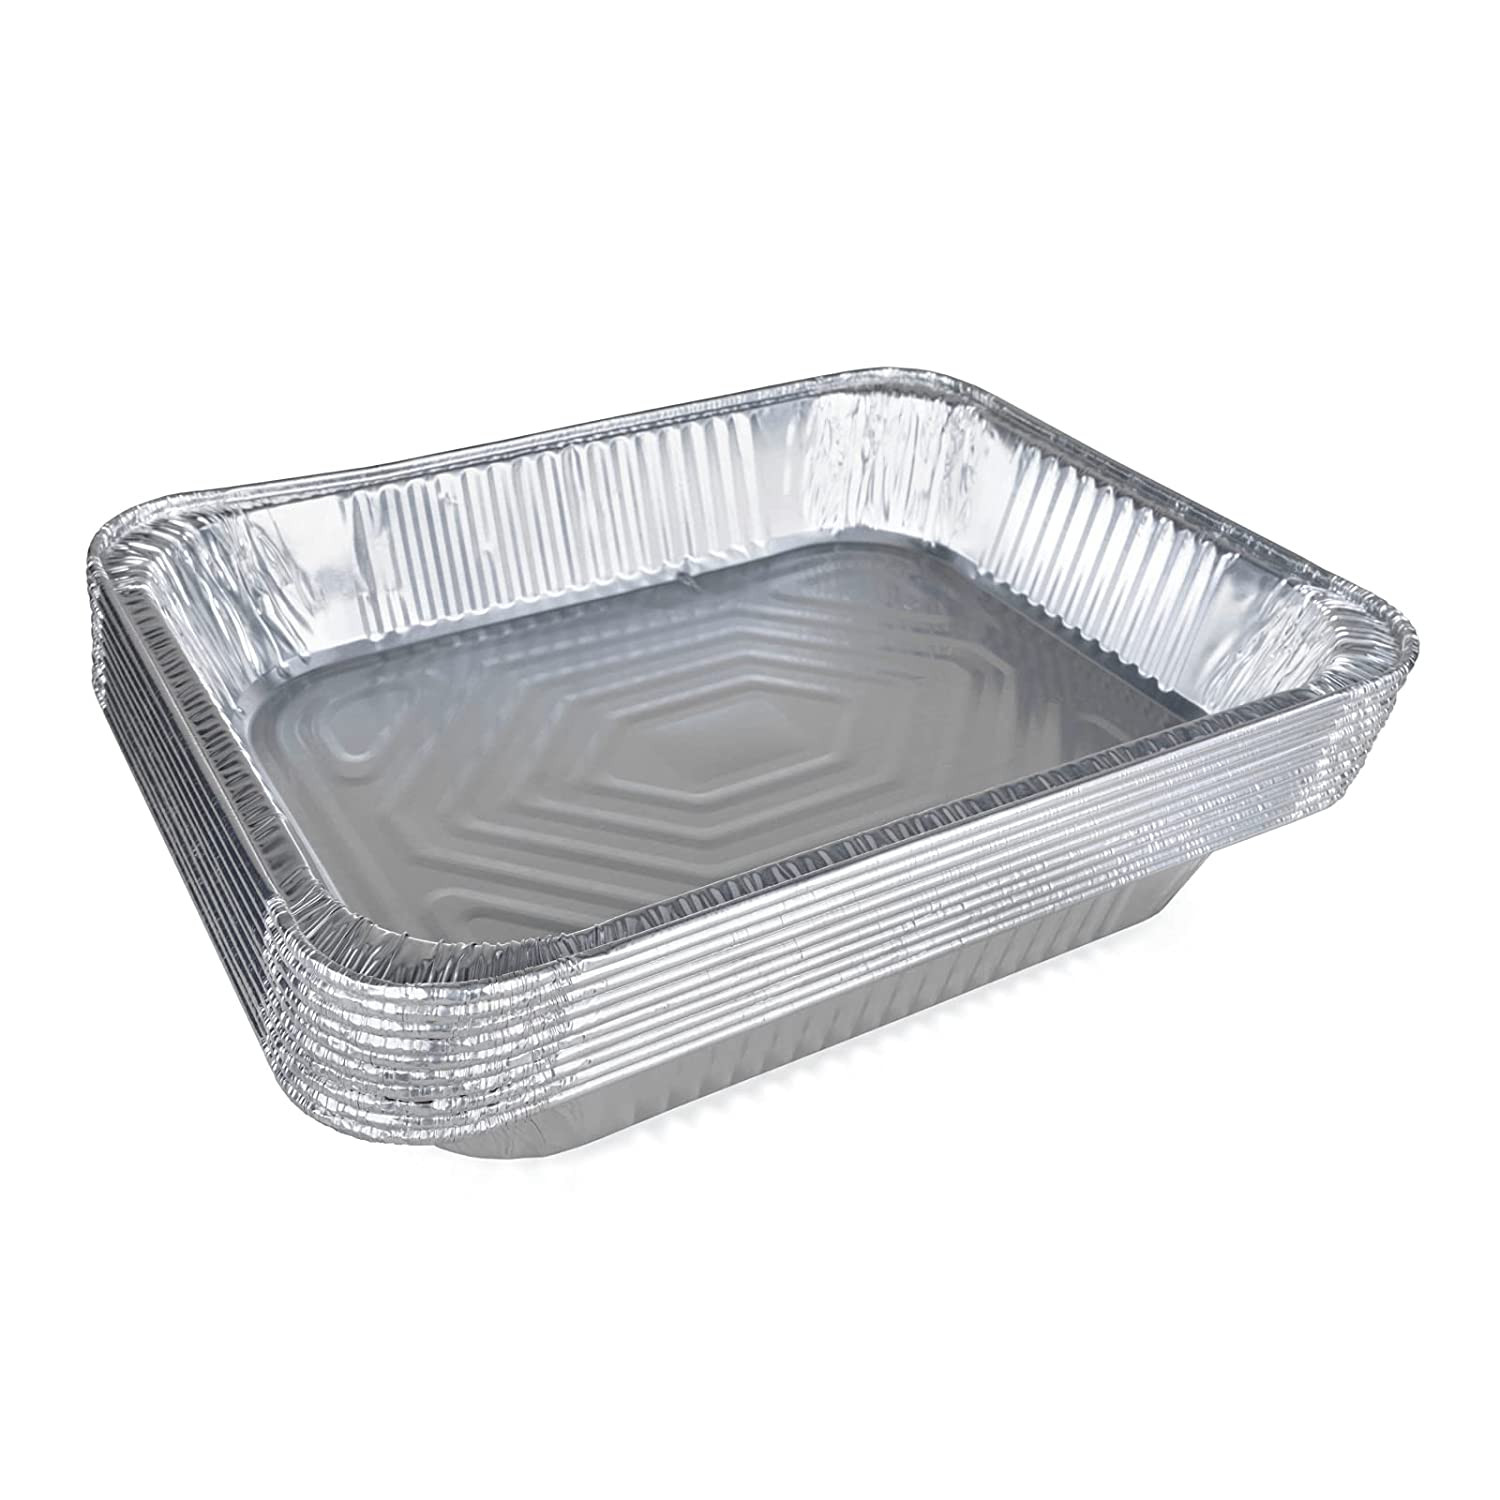 https://idlpack.com/image/cache/catalog/Products/Foil%20Pans%20and%20Trays/61REXfORFRL._SL1500_-1500x1500.jpg